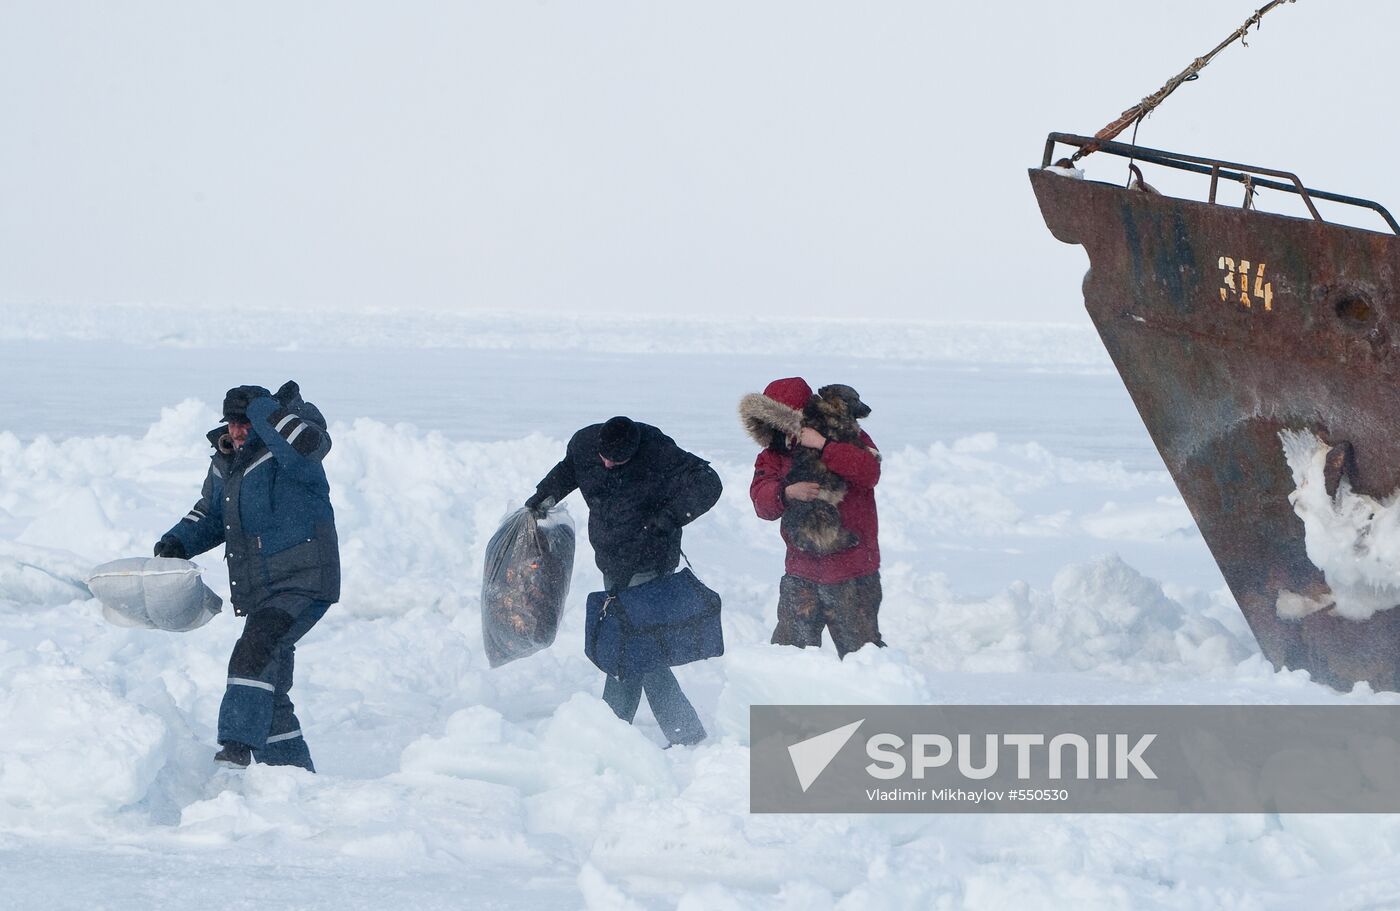 Rescue operation completed in the Okhotsk Sea